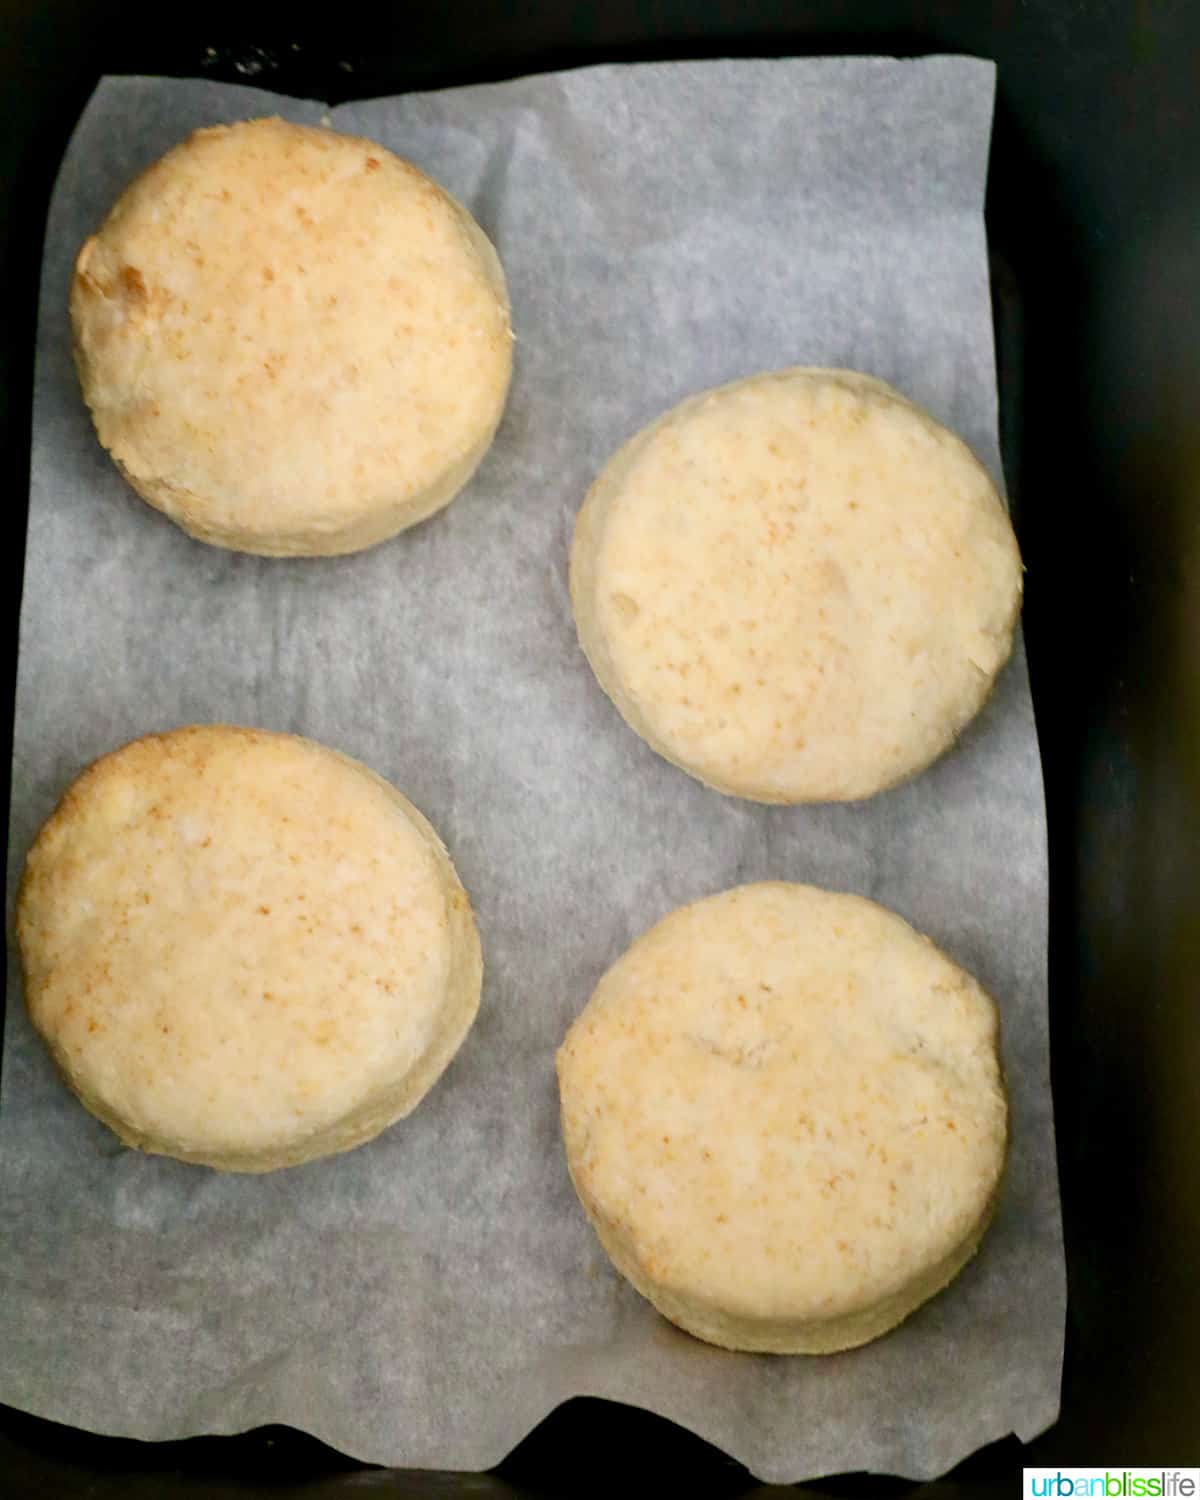 air fried biscuits just cooked in an air fryer basket.